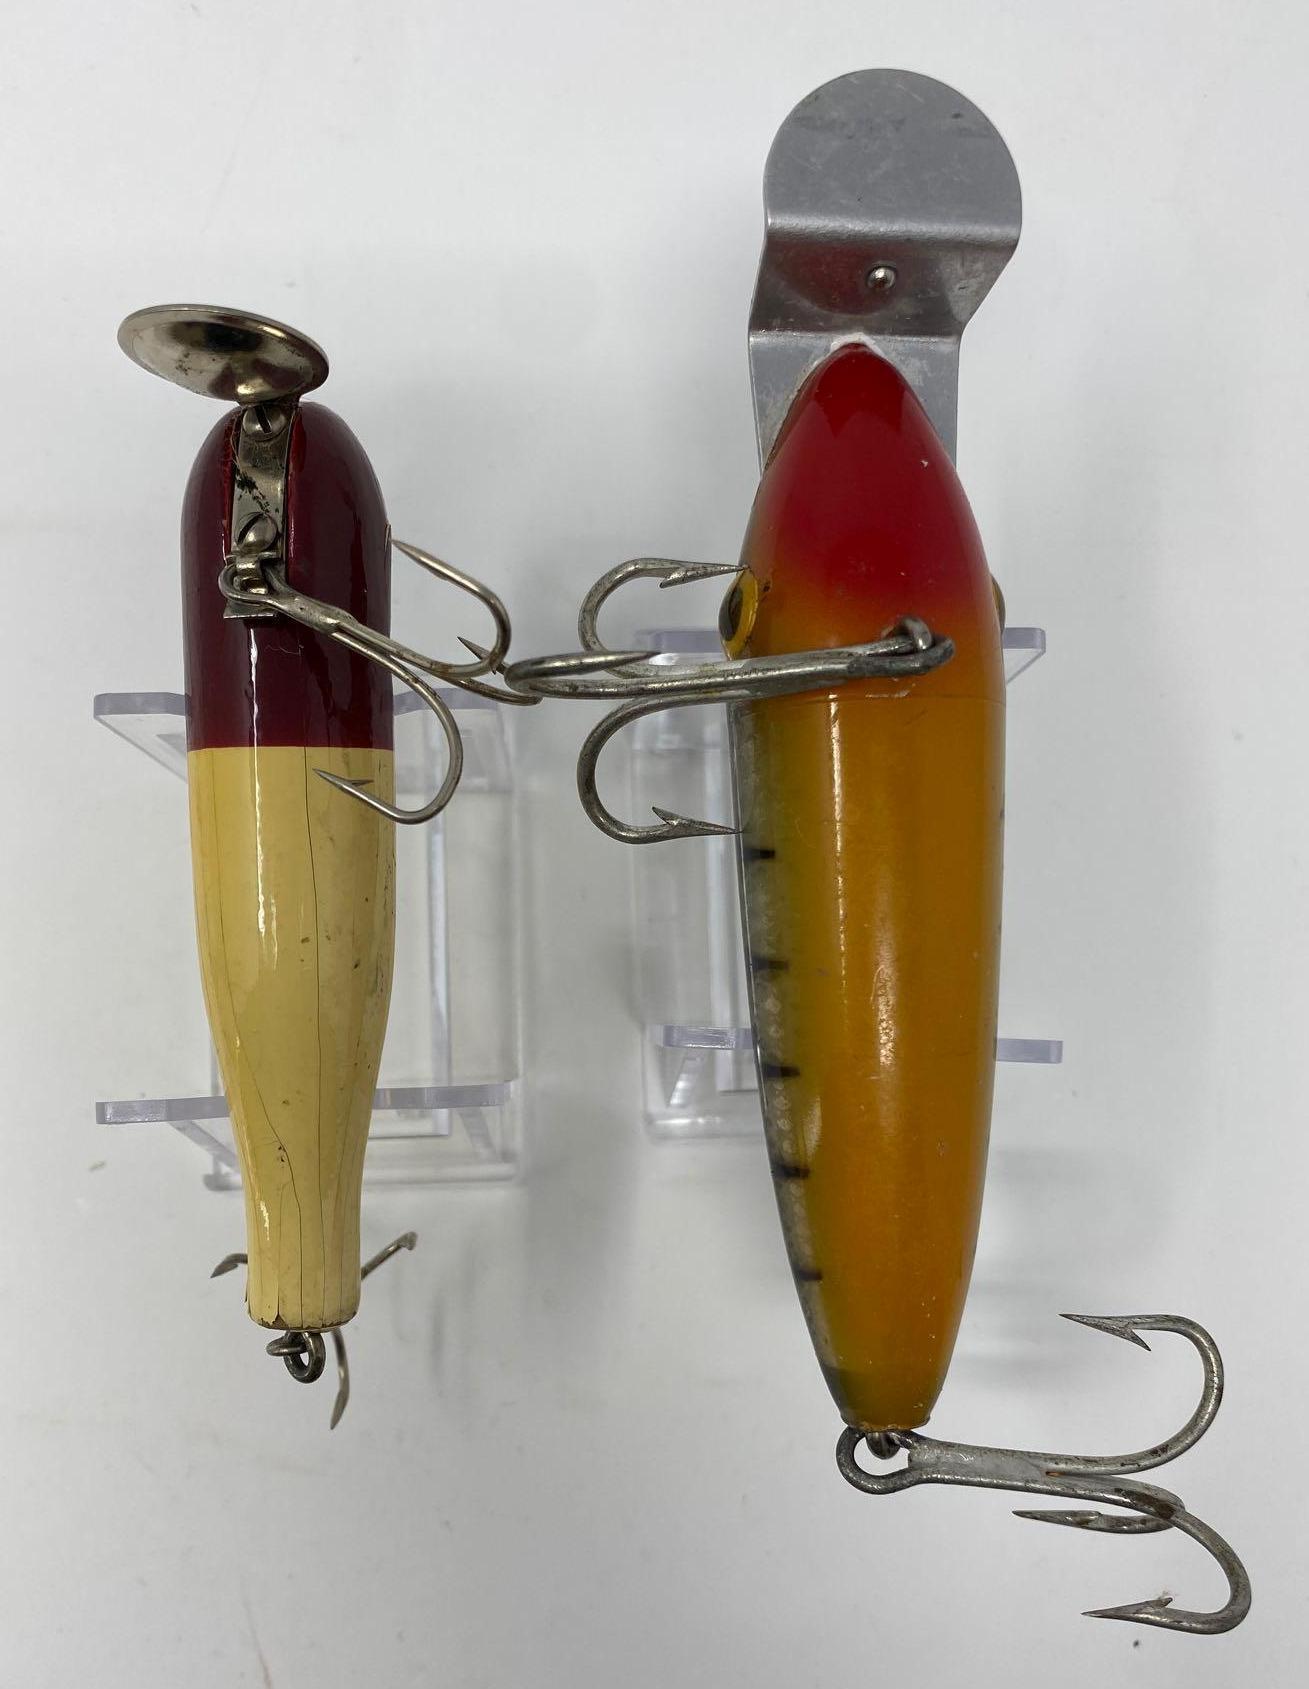 Two Wooden Vintage Fishing Lures